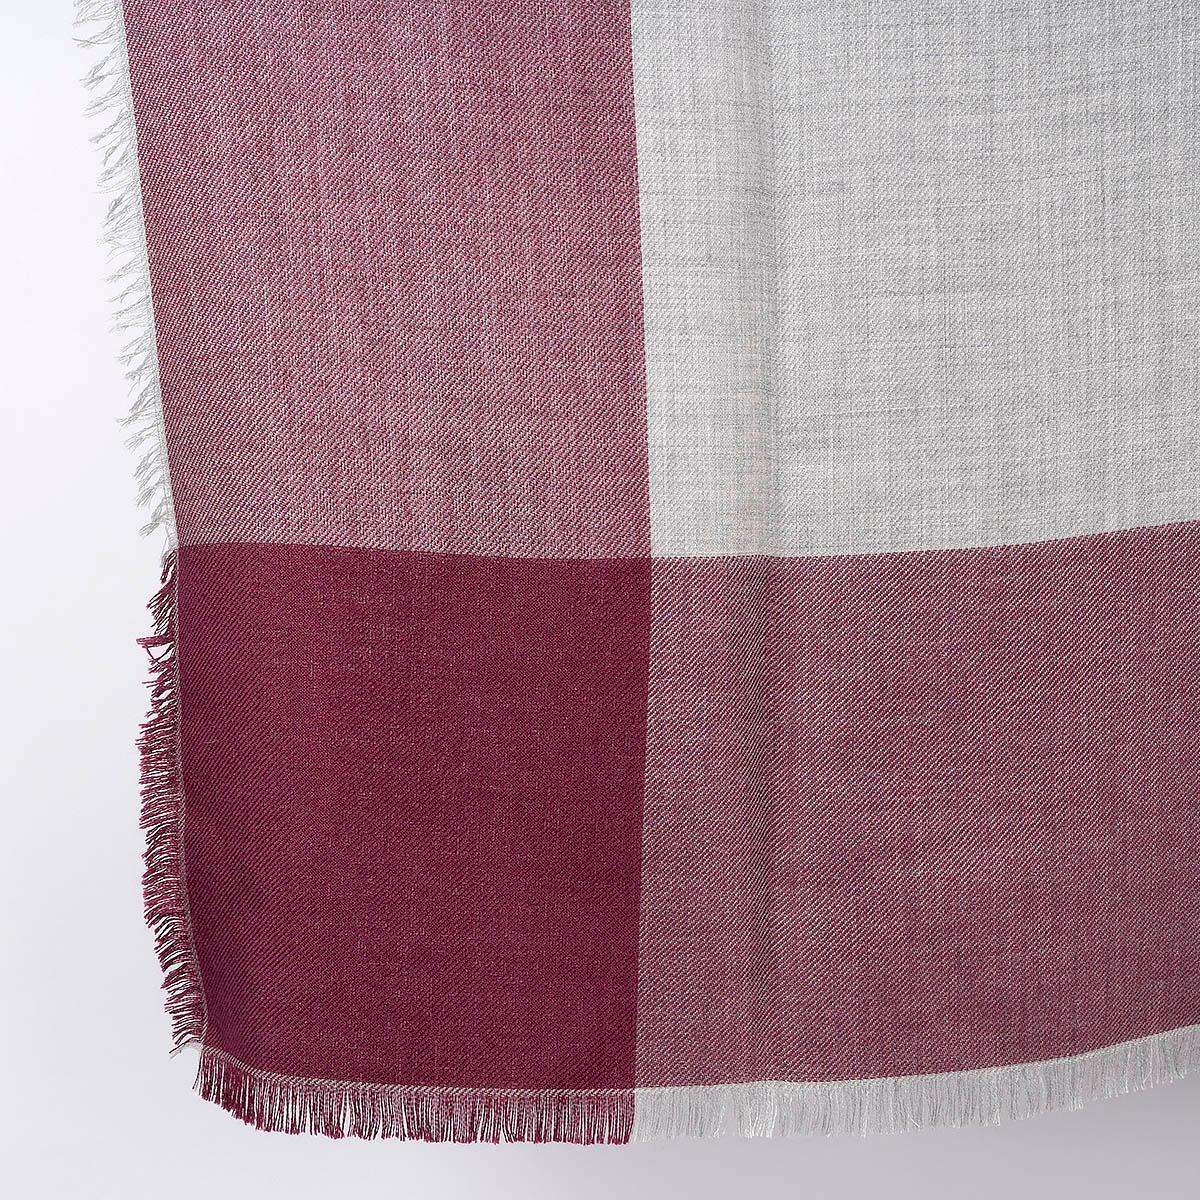 100% authentic Loro Piana Quadrilatero del Silenzio 90 scarf in grey, plum and light plum cashmere silk twill (100%).  Has been worn once and is in virtually new condition. 

Measurements
Width	90cm (35.1in)
Length	90cm (35.1in)

All our listings